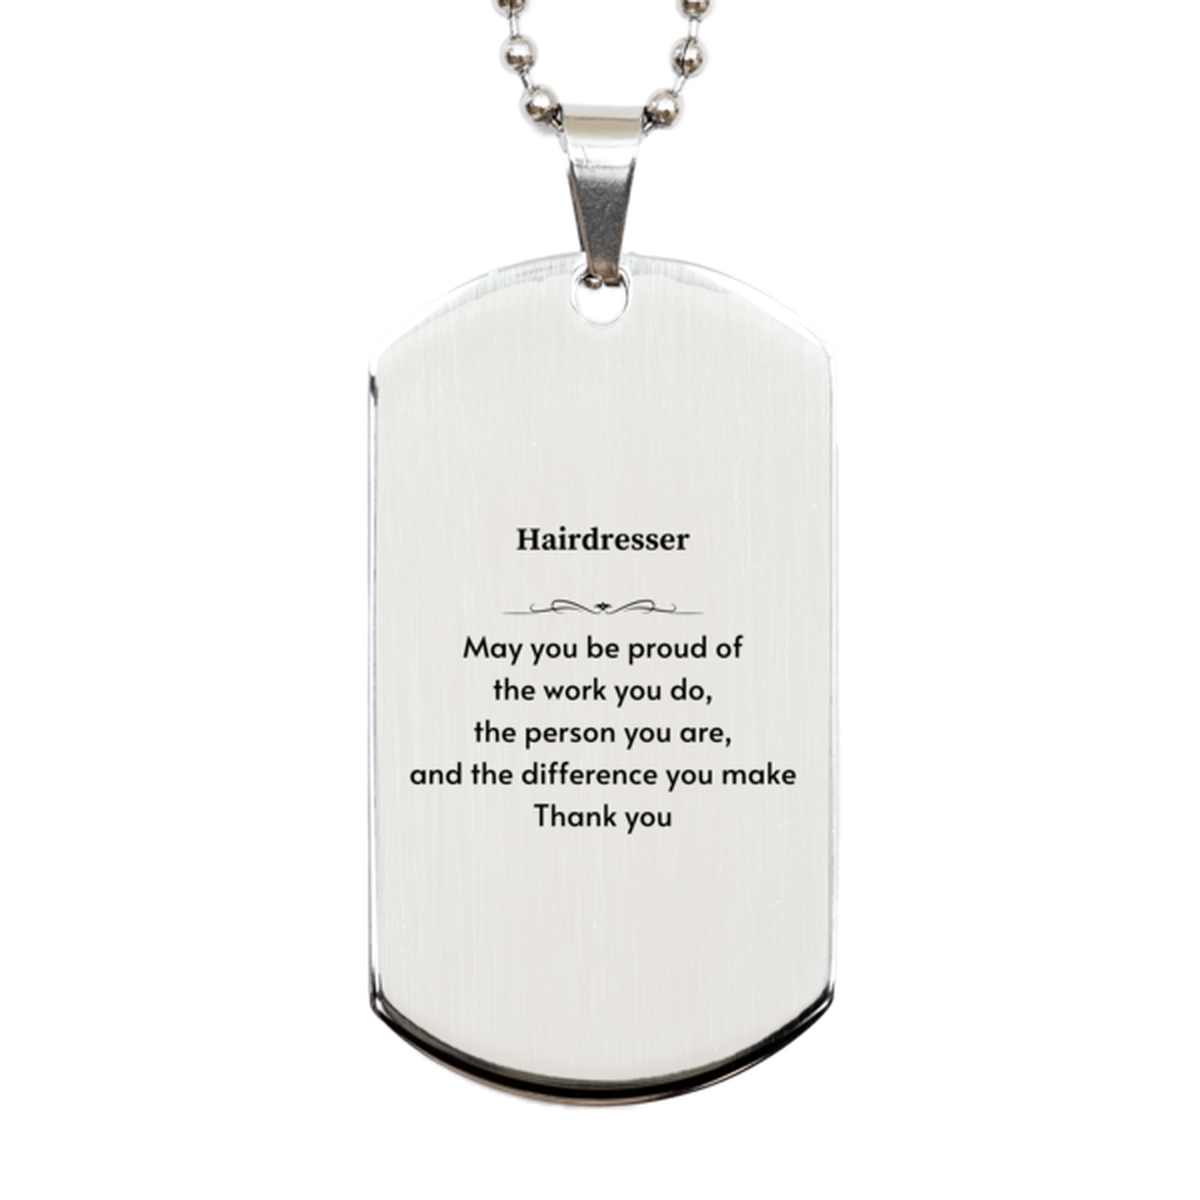 Heartwarming Silver Dog Tag Retirement Coworkers Gifts for Hairdresser, Hairdresser May You be proud of the work you do, the person you are Gifts for Boss Men Women Friends